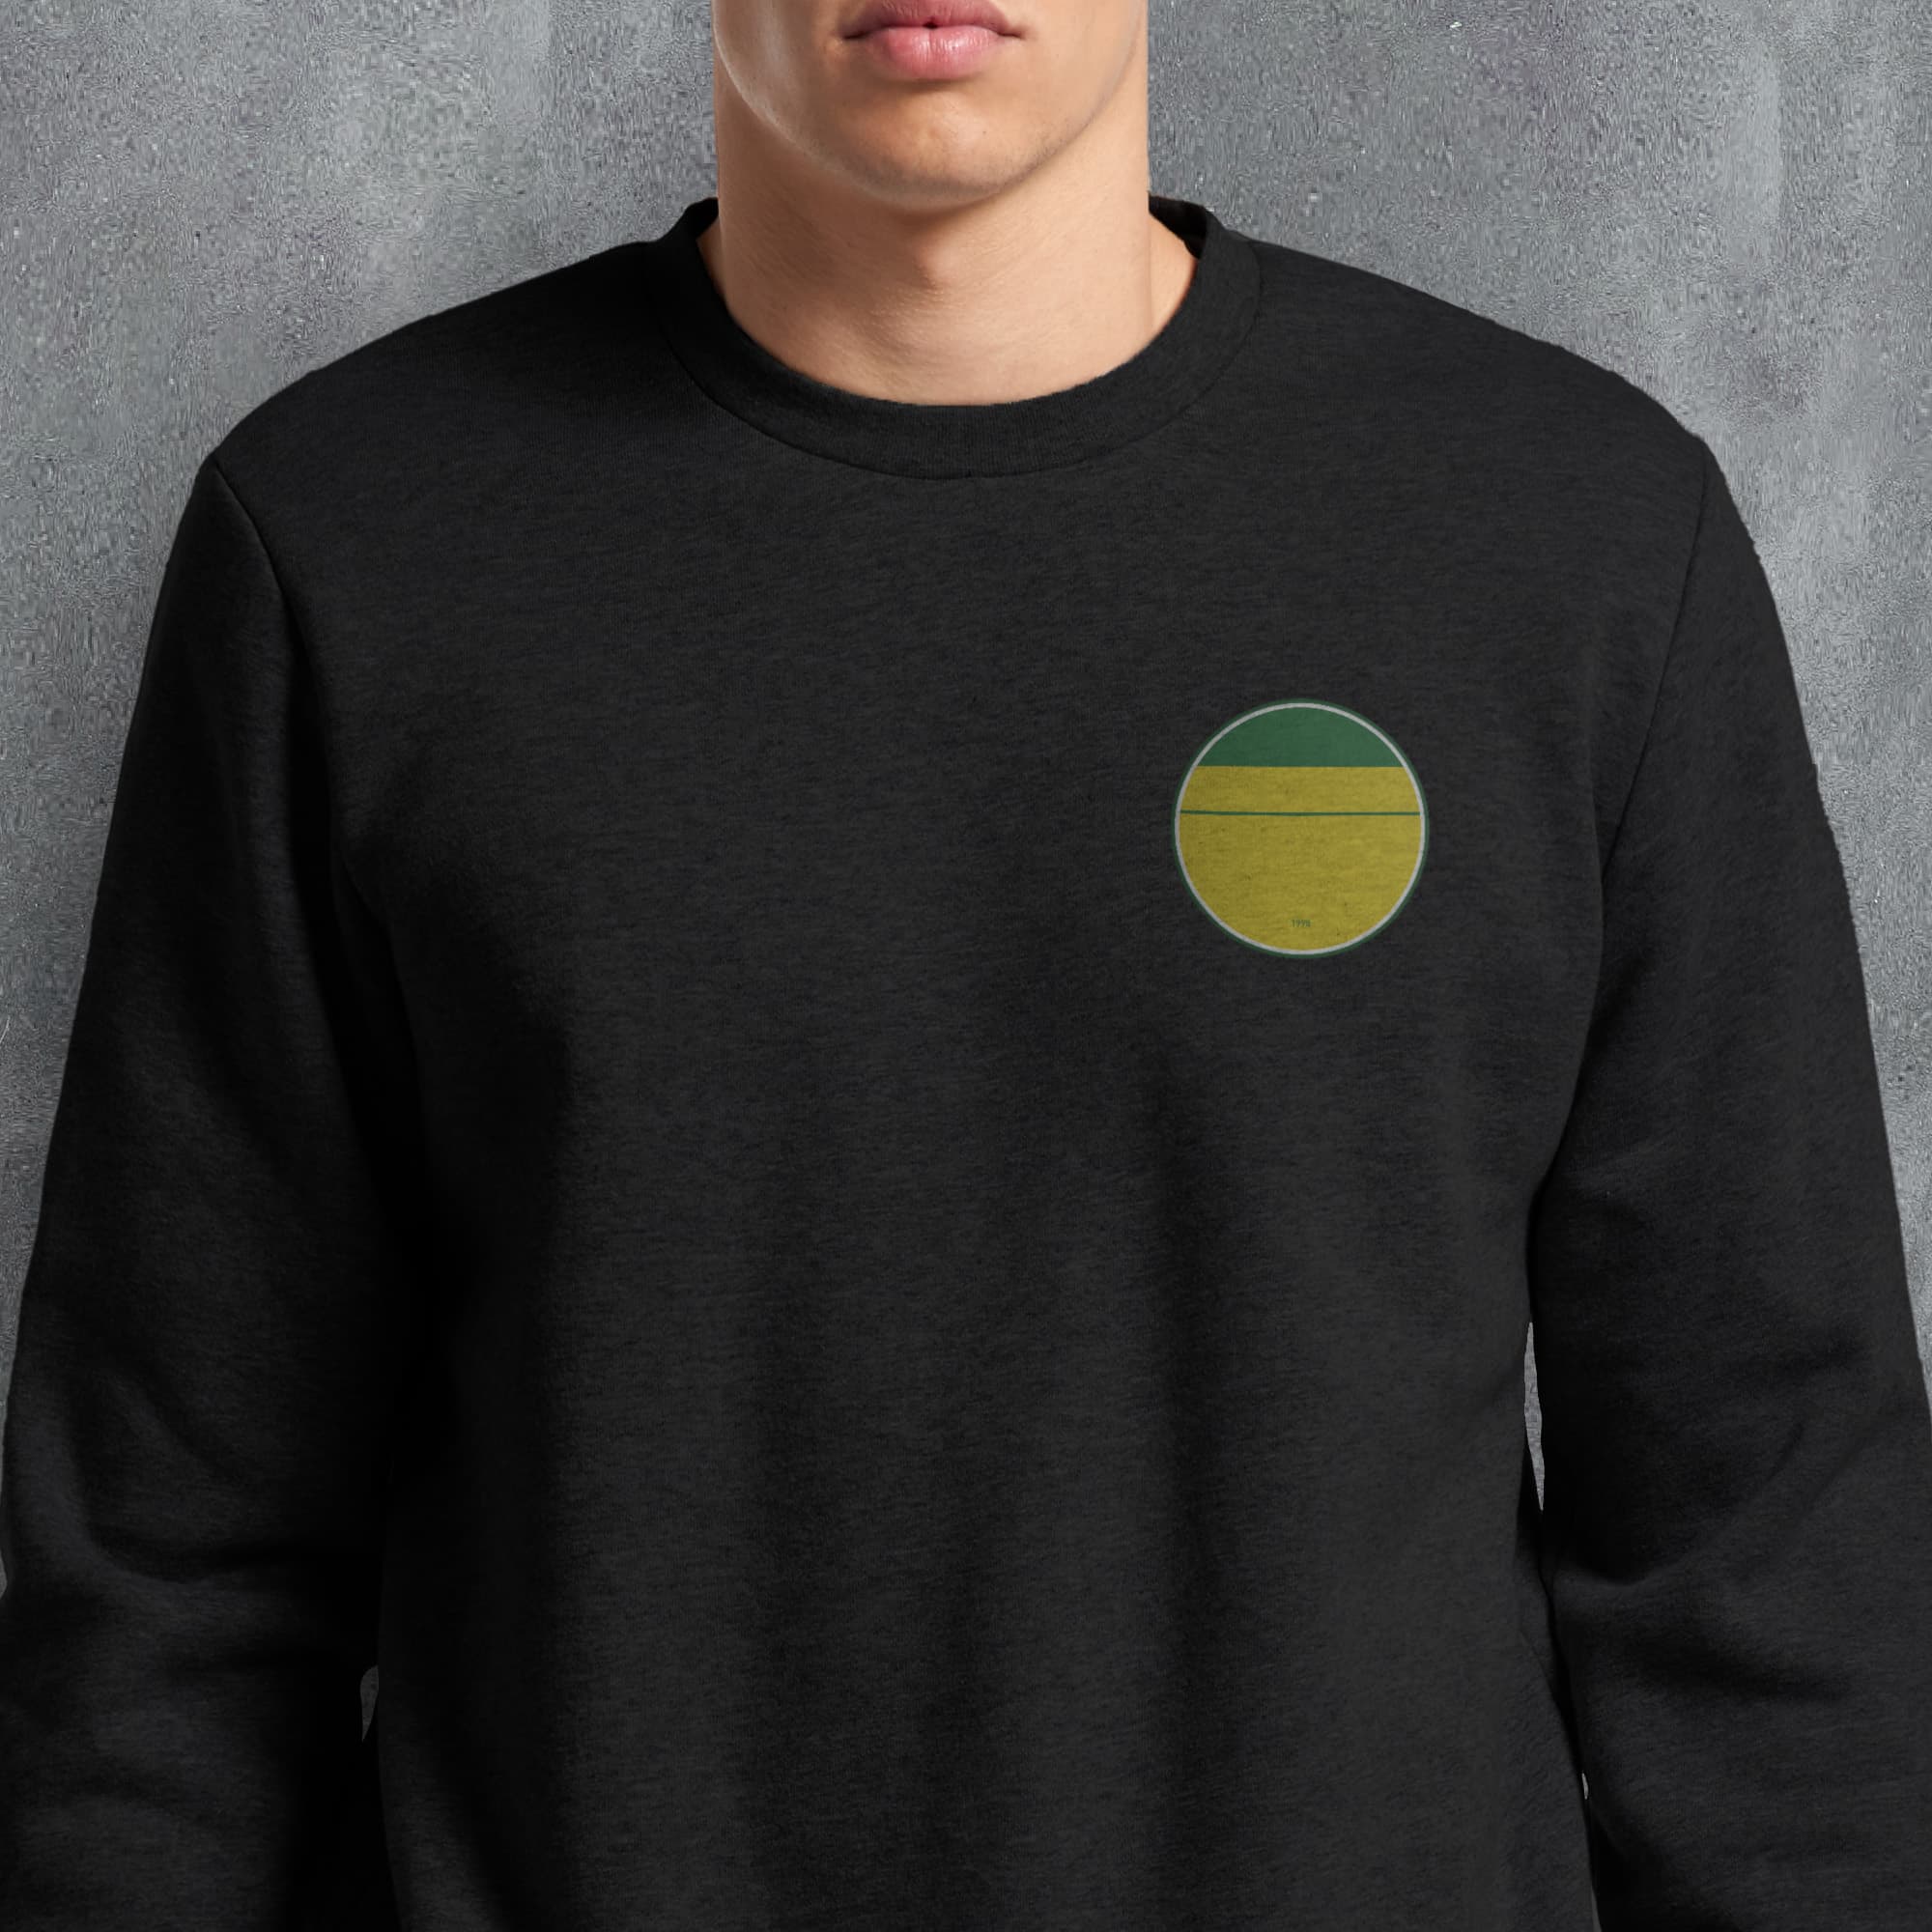 a man wearing a black sweatshirt with a green and yellow circle on it